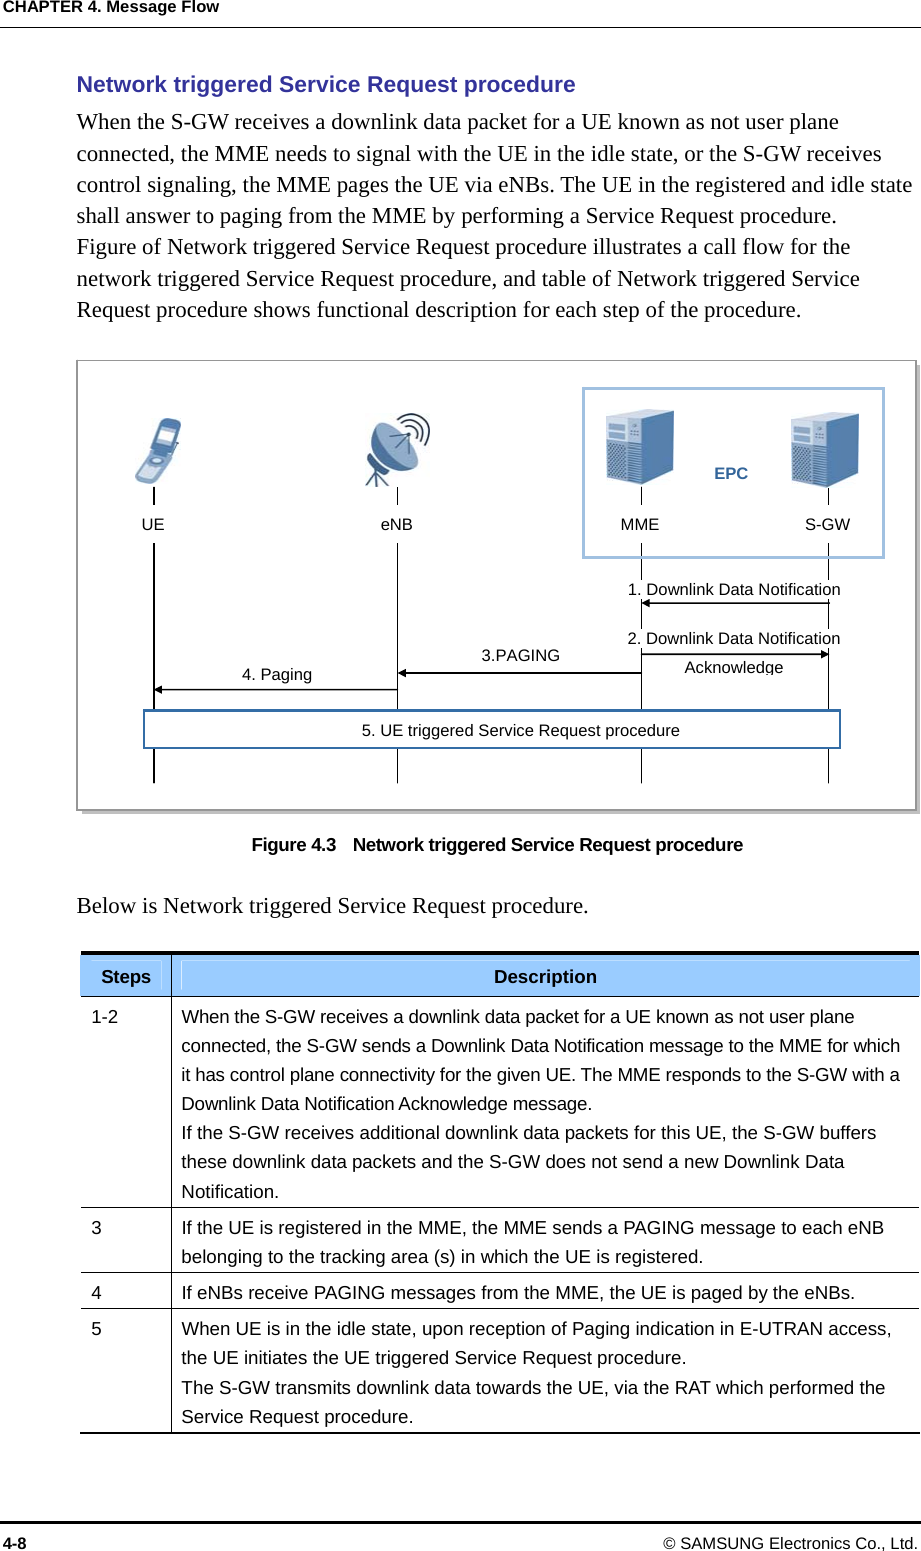 CHAPTER 4. Message Flow 4-8  © SAMSUNG Electronics Co., Ltd. Network triggered Service Request procedure When the S-GW receives a downlink data packet for a UE known as not user plane connected, the MME needs to signal with the UE in the idle state, or the S-GW receives control signaling, the MME pages the UE via eNBs. The UE in the registered and idle state shall answer to paging from the MME by performing a Service Request procedure. Figure of Network triggered Service Request procedure illustrates a call flow for the network triggered Service Request procedure, and table of Network triggered Service Request procedure shows functional description for each step of the procedure.  Figure 4.3    Network triggered Service Request procedure  Below is Network triggered Service Request procedure.  Steps  Description 1-2  When the S-GW receives a downlink data packet for a UE known as not user plane connected, the S-GW sends a Downlink Data Notification message to the MME for which it has control plane connectivity for the given UE. The MME responds to the S-GW with a Downlink Data Notification Acknowledge message. If the S-GW receives additional downlink data packets for this UE, the S-GW buffers these downlink data packets and the S-GW does not send a new Downlink Data Notification. 3  If the UE is registered in the MME, the MME sends a PAGING message to each eNB belonging to the tracking area (s) in which the UE is registered. 4  If eNBs receive PAGING messages from the MME, the UE is paged by the eNBs. 5  When UE is in the idle state, upon reception of Paging indication in E-UTRAN access, the UE initiates the UE triggered Service Request procedure. The S-GW transmits downlink data towards the UE, via the RAT which performed the Service Request procedure. UE  eNB MME  S-GW EPC 5. UE triggered Service Request procedure 4. Paging 1. Downlink Data Notification 2. Downlink Data Notification Acknowledge 3.PAGING 